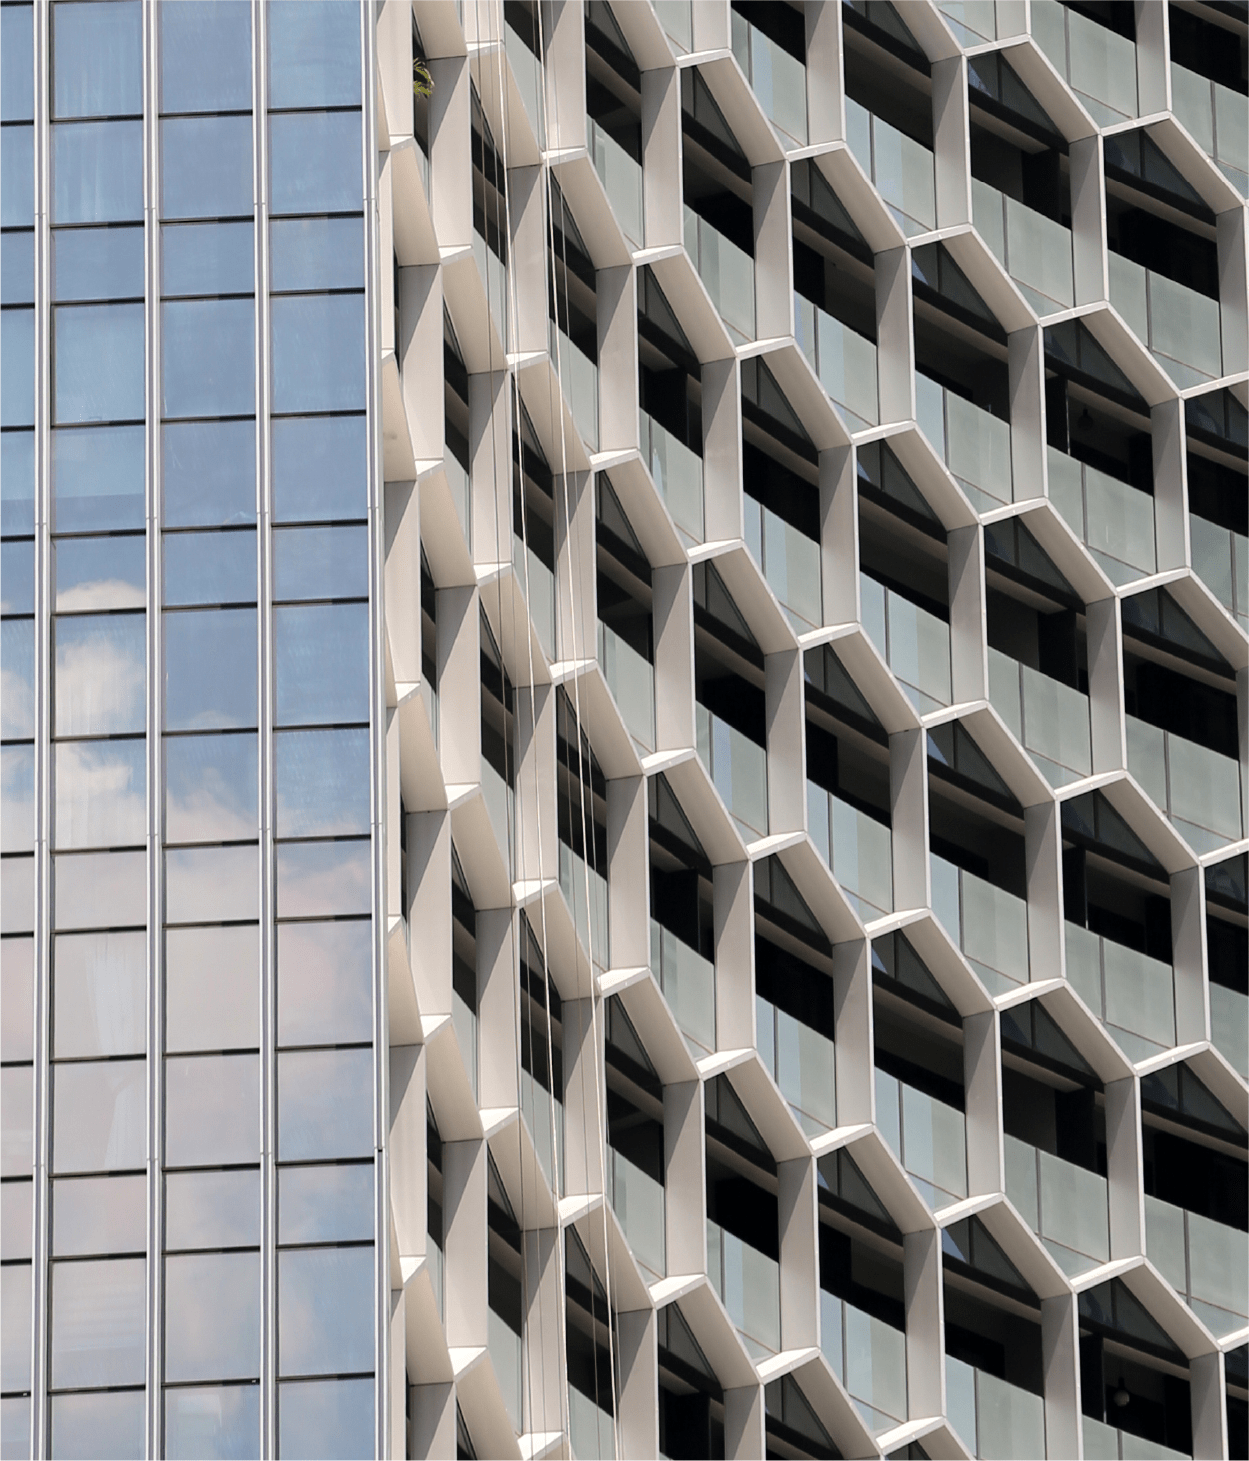 Curved office building façade with hexagonal frames over its windows.